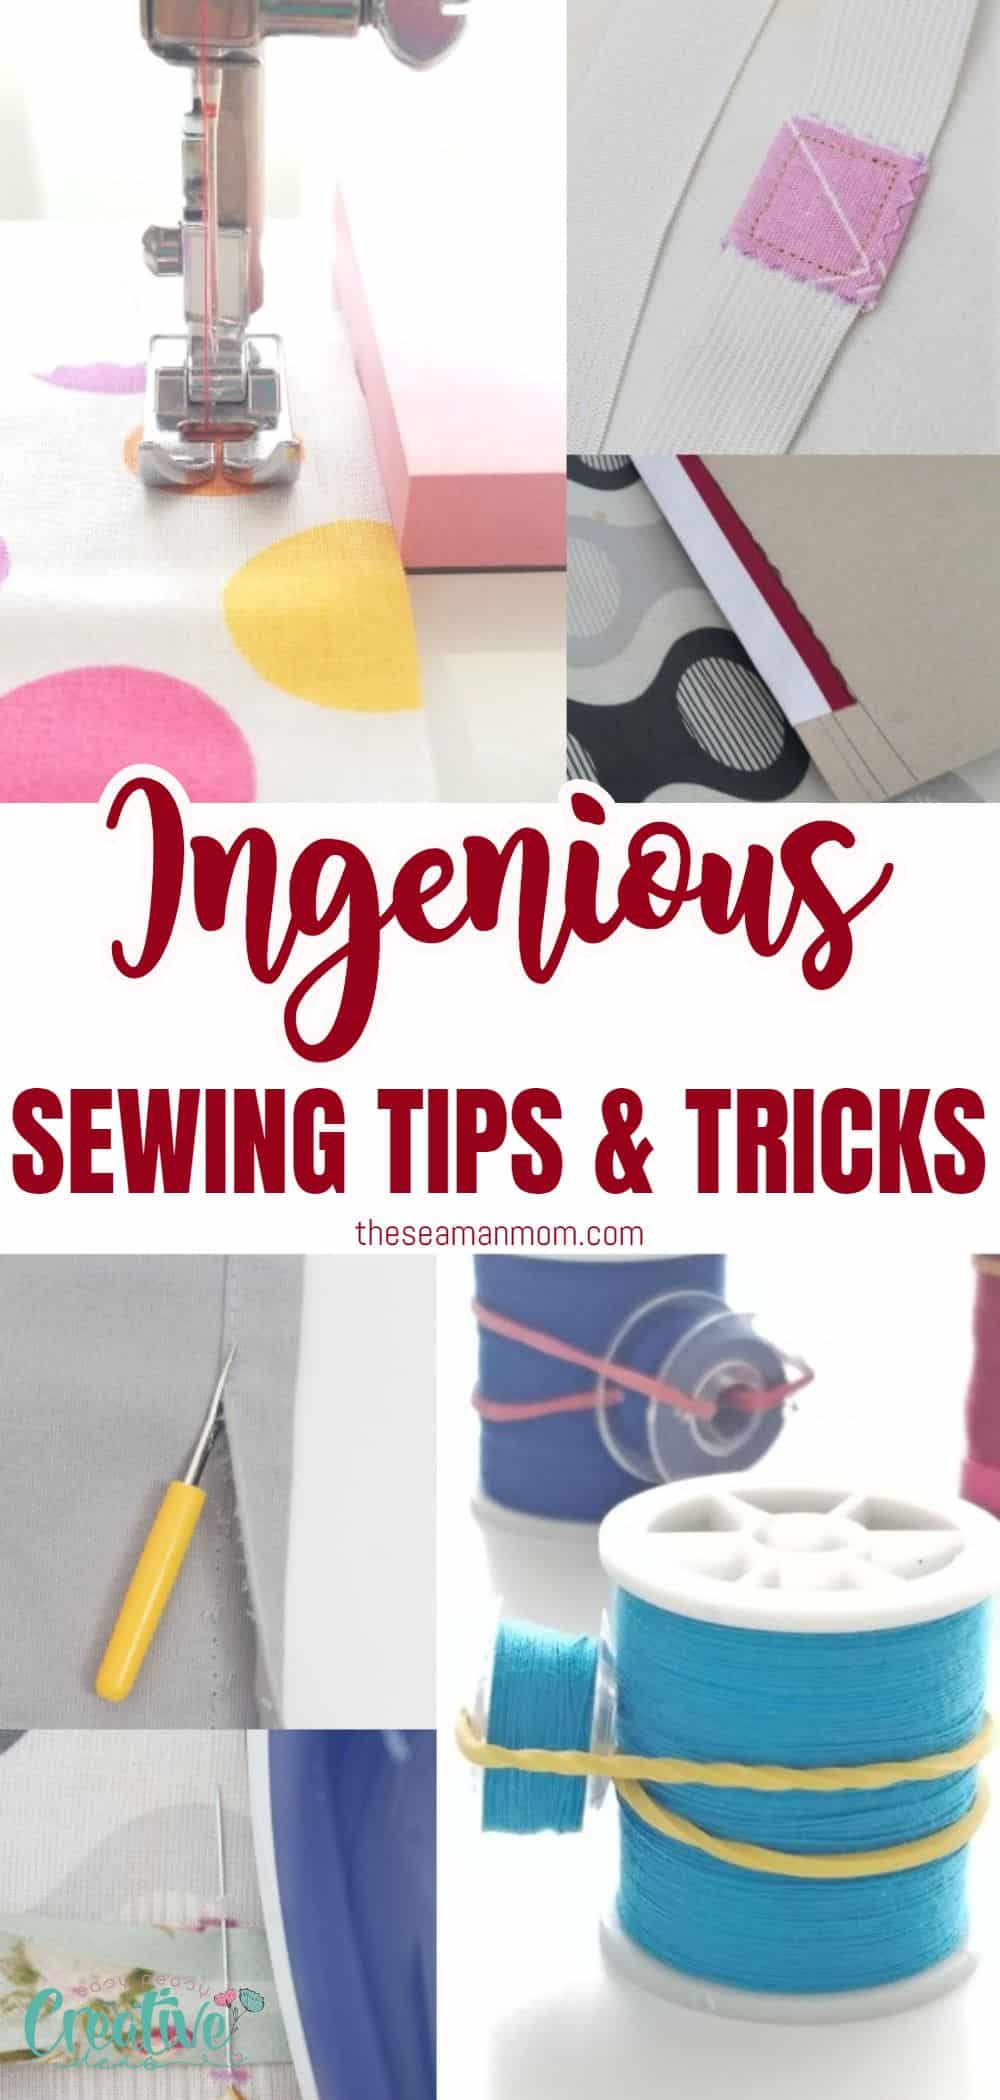 Struggling with sewing and looking for ways to make it easier? Take a look at this list of helpful sewing tips that can improve your efficiency and overall sewing experience. The list includes tips for beginners and even some lesser-known tricks for experienced sewers. You'll find lots of clever sewing hacks that you wish you had known earlier! via @petroneagu